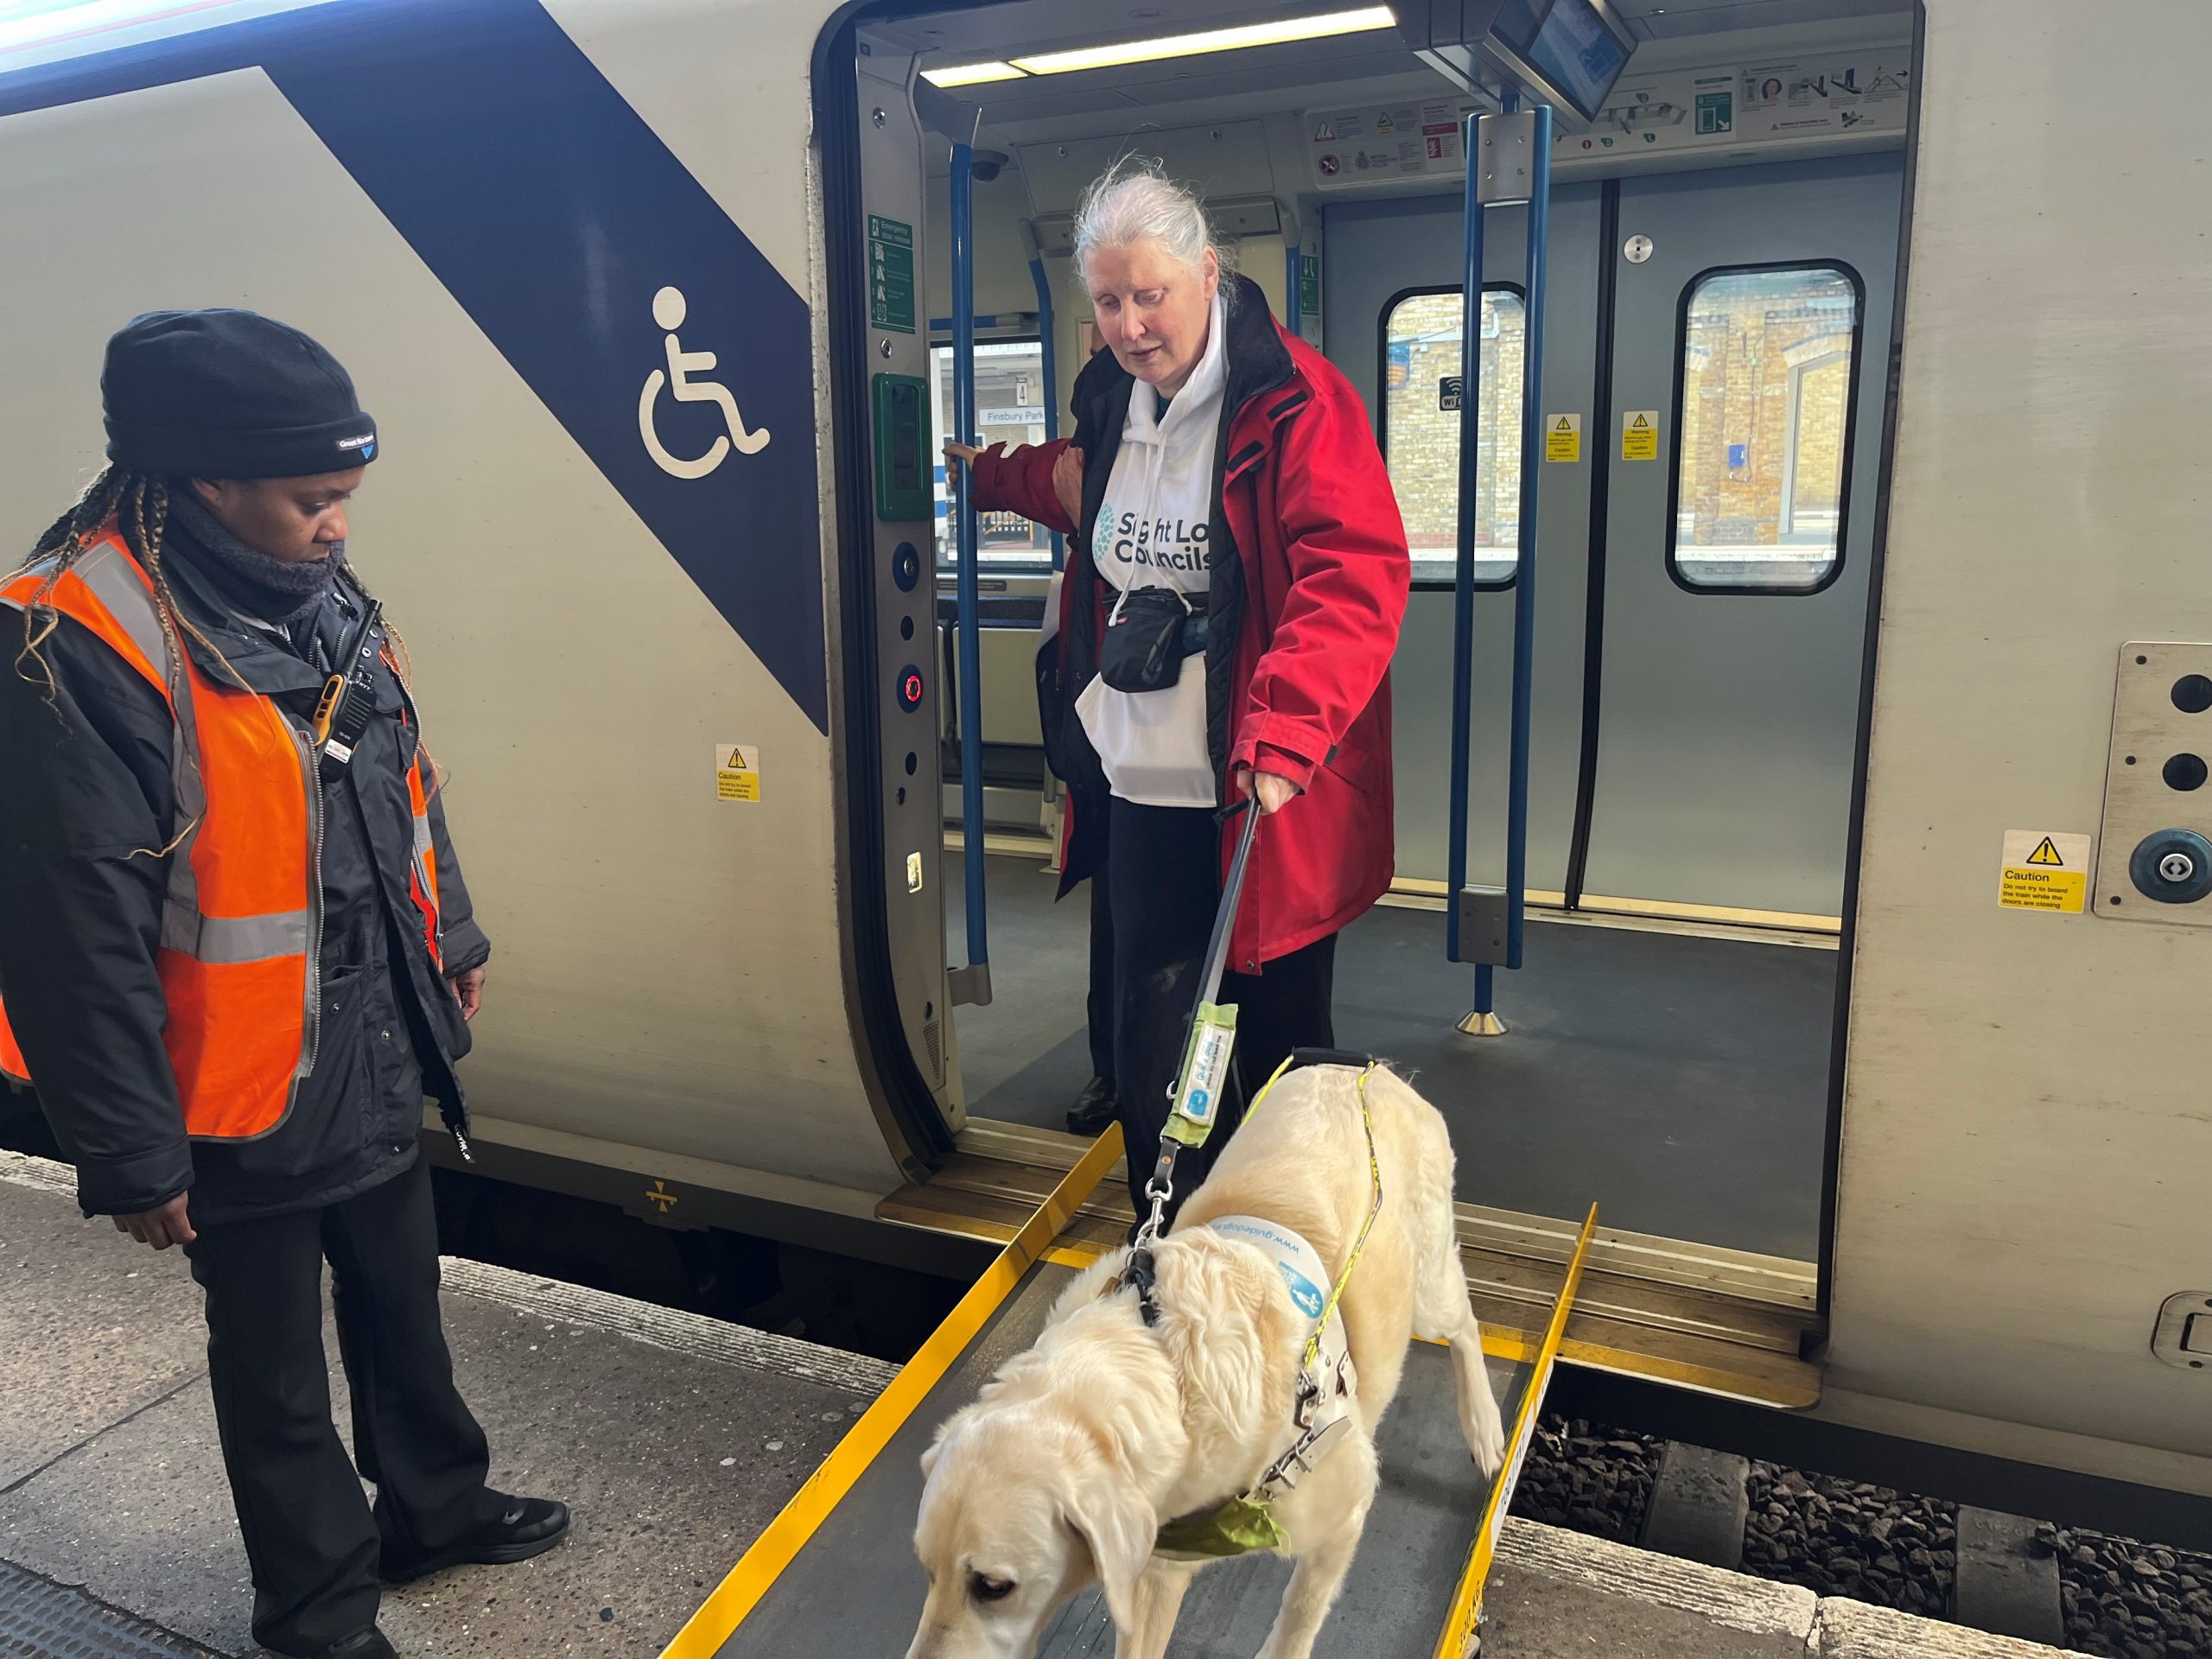 Mary Cox, South West London SLC member, disembarking a train with her guide dog, as a member of staff looks on.